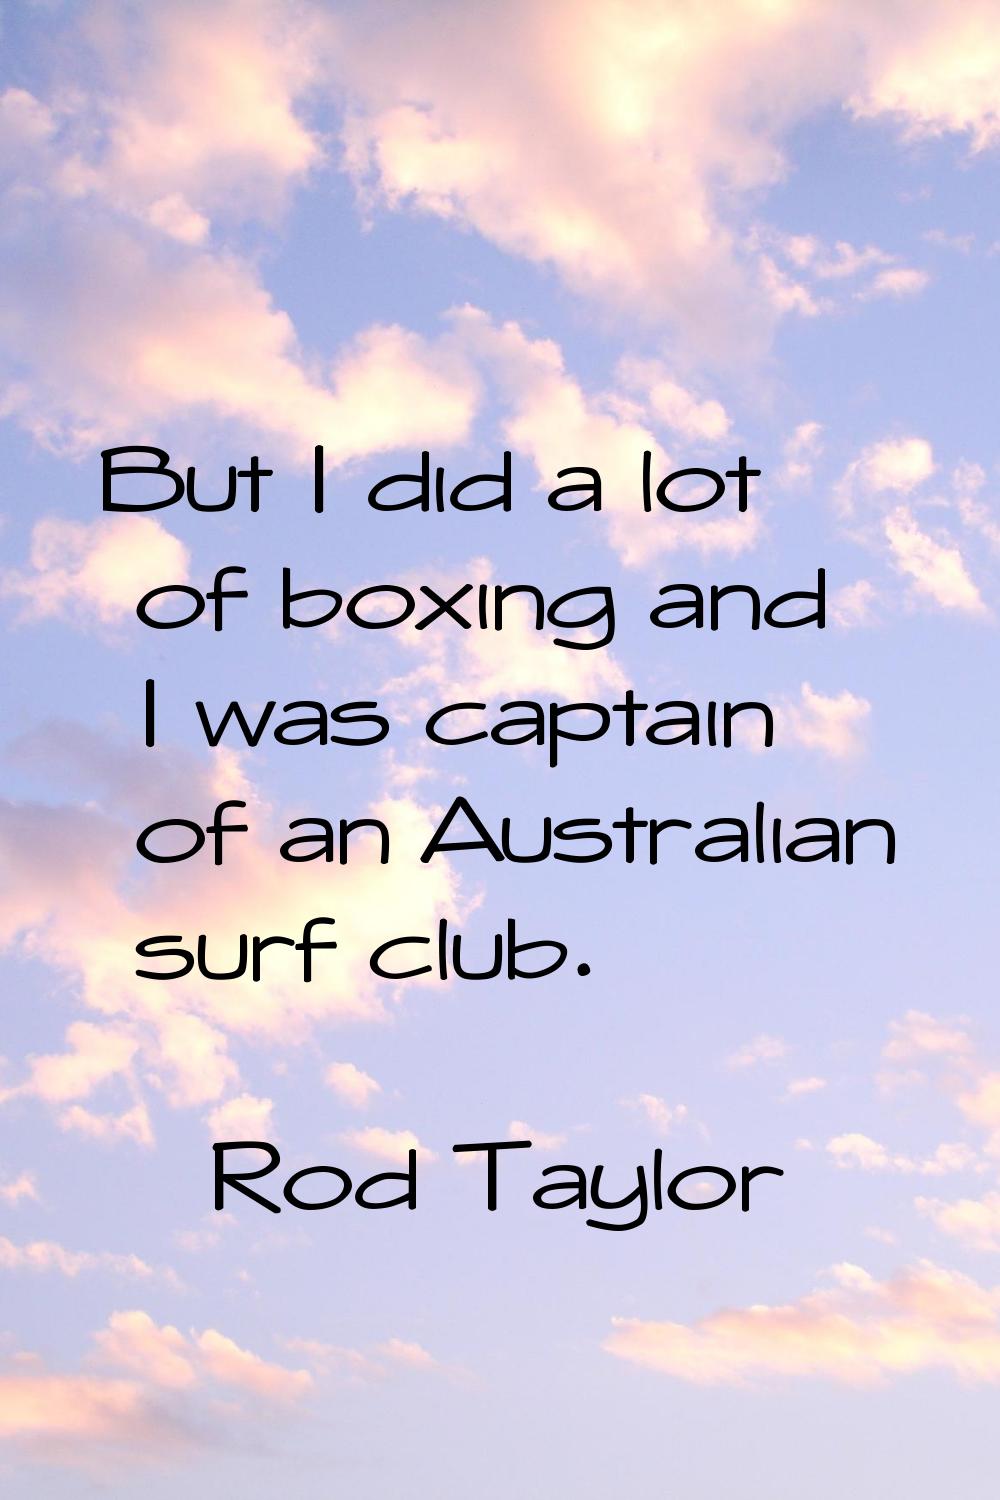 But I did a lot of boxing and I was captain of an Australian surf club.